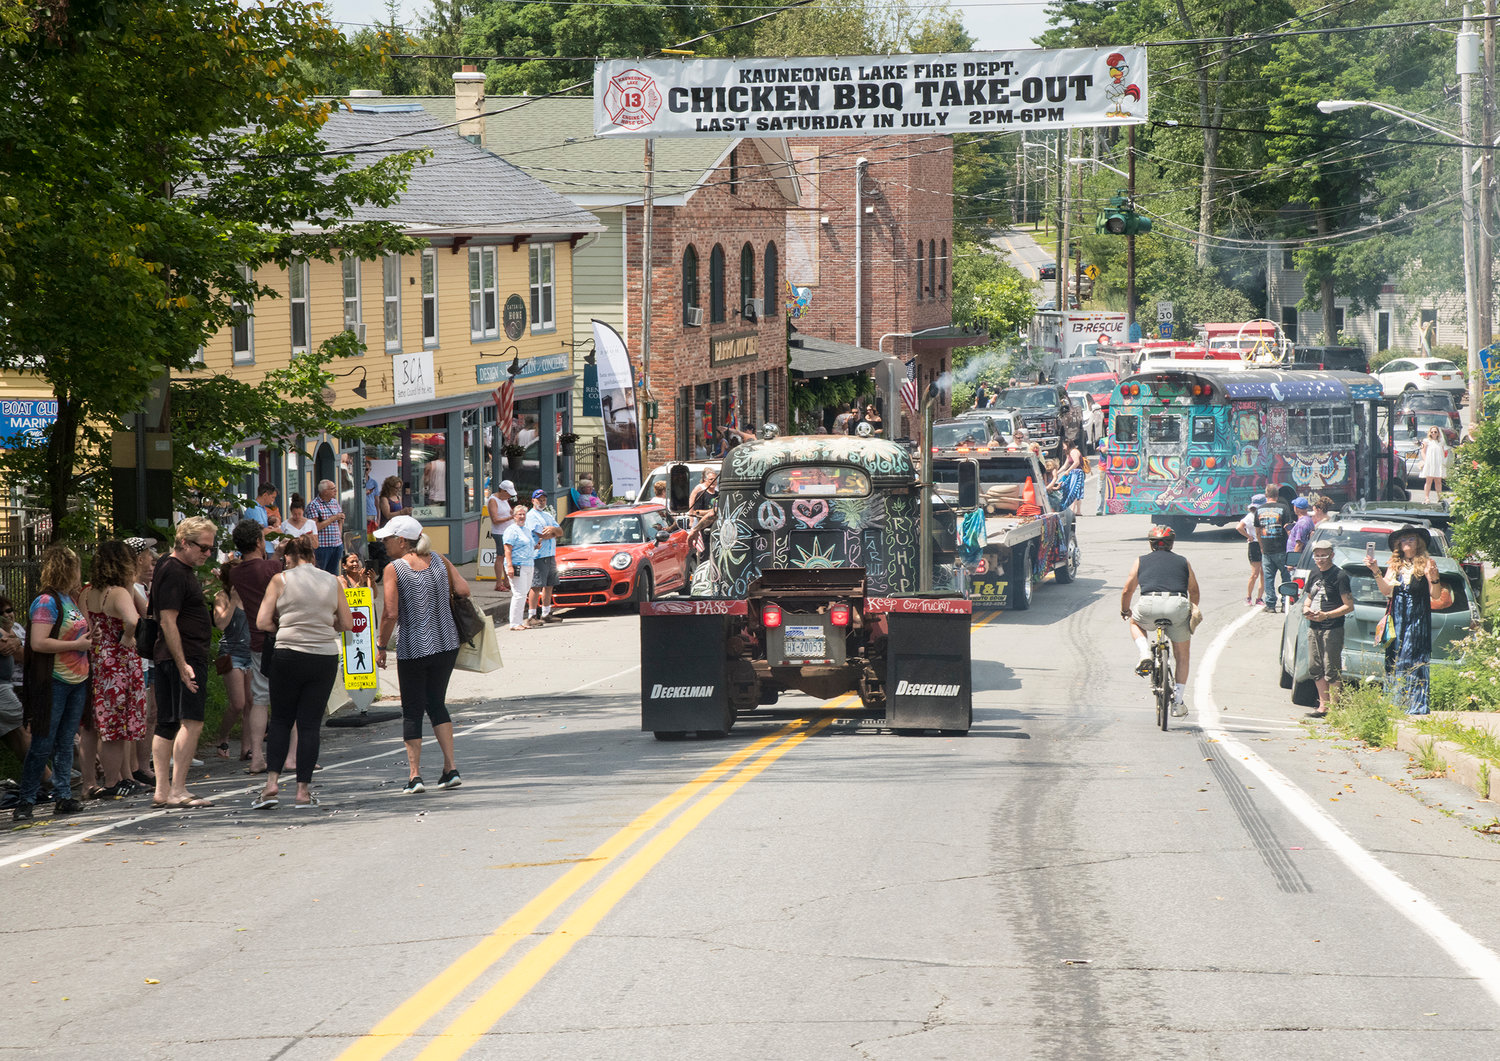 The parade ended in downtown Kauneonga Lake at the Town Square. The festivities continued all day with a chicken BBQ fundraiser hosted by the Kauneonga Lake Firehouse, followed by hours of live music into an evening of outdoor viewing of two Woodstock-related films.